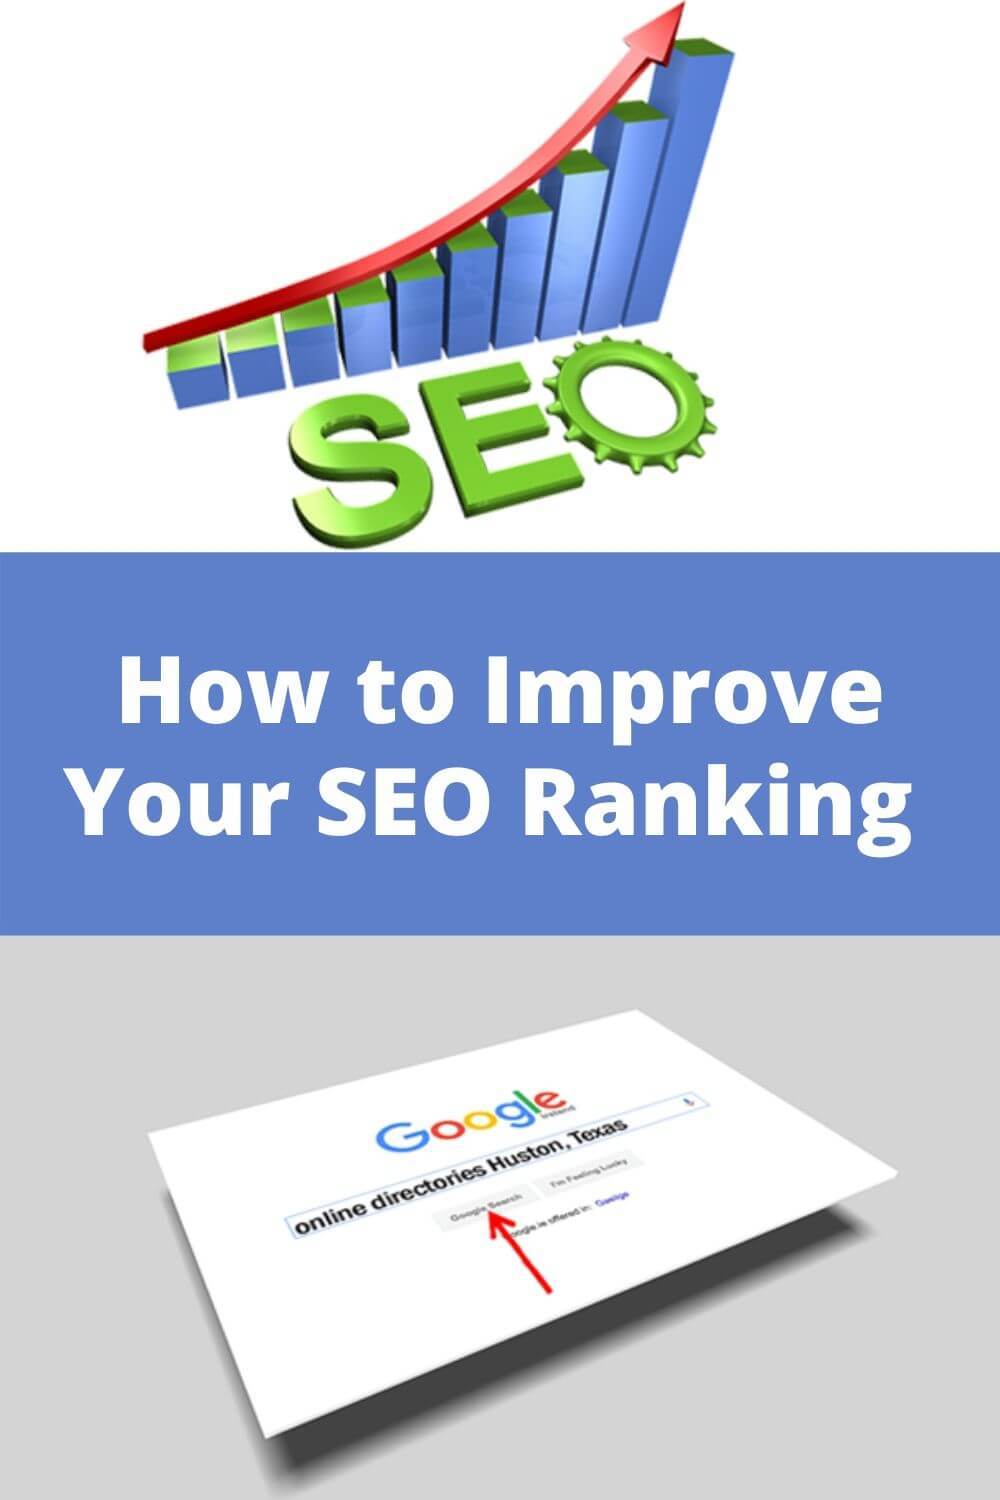 How to improve your SEO ranking